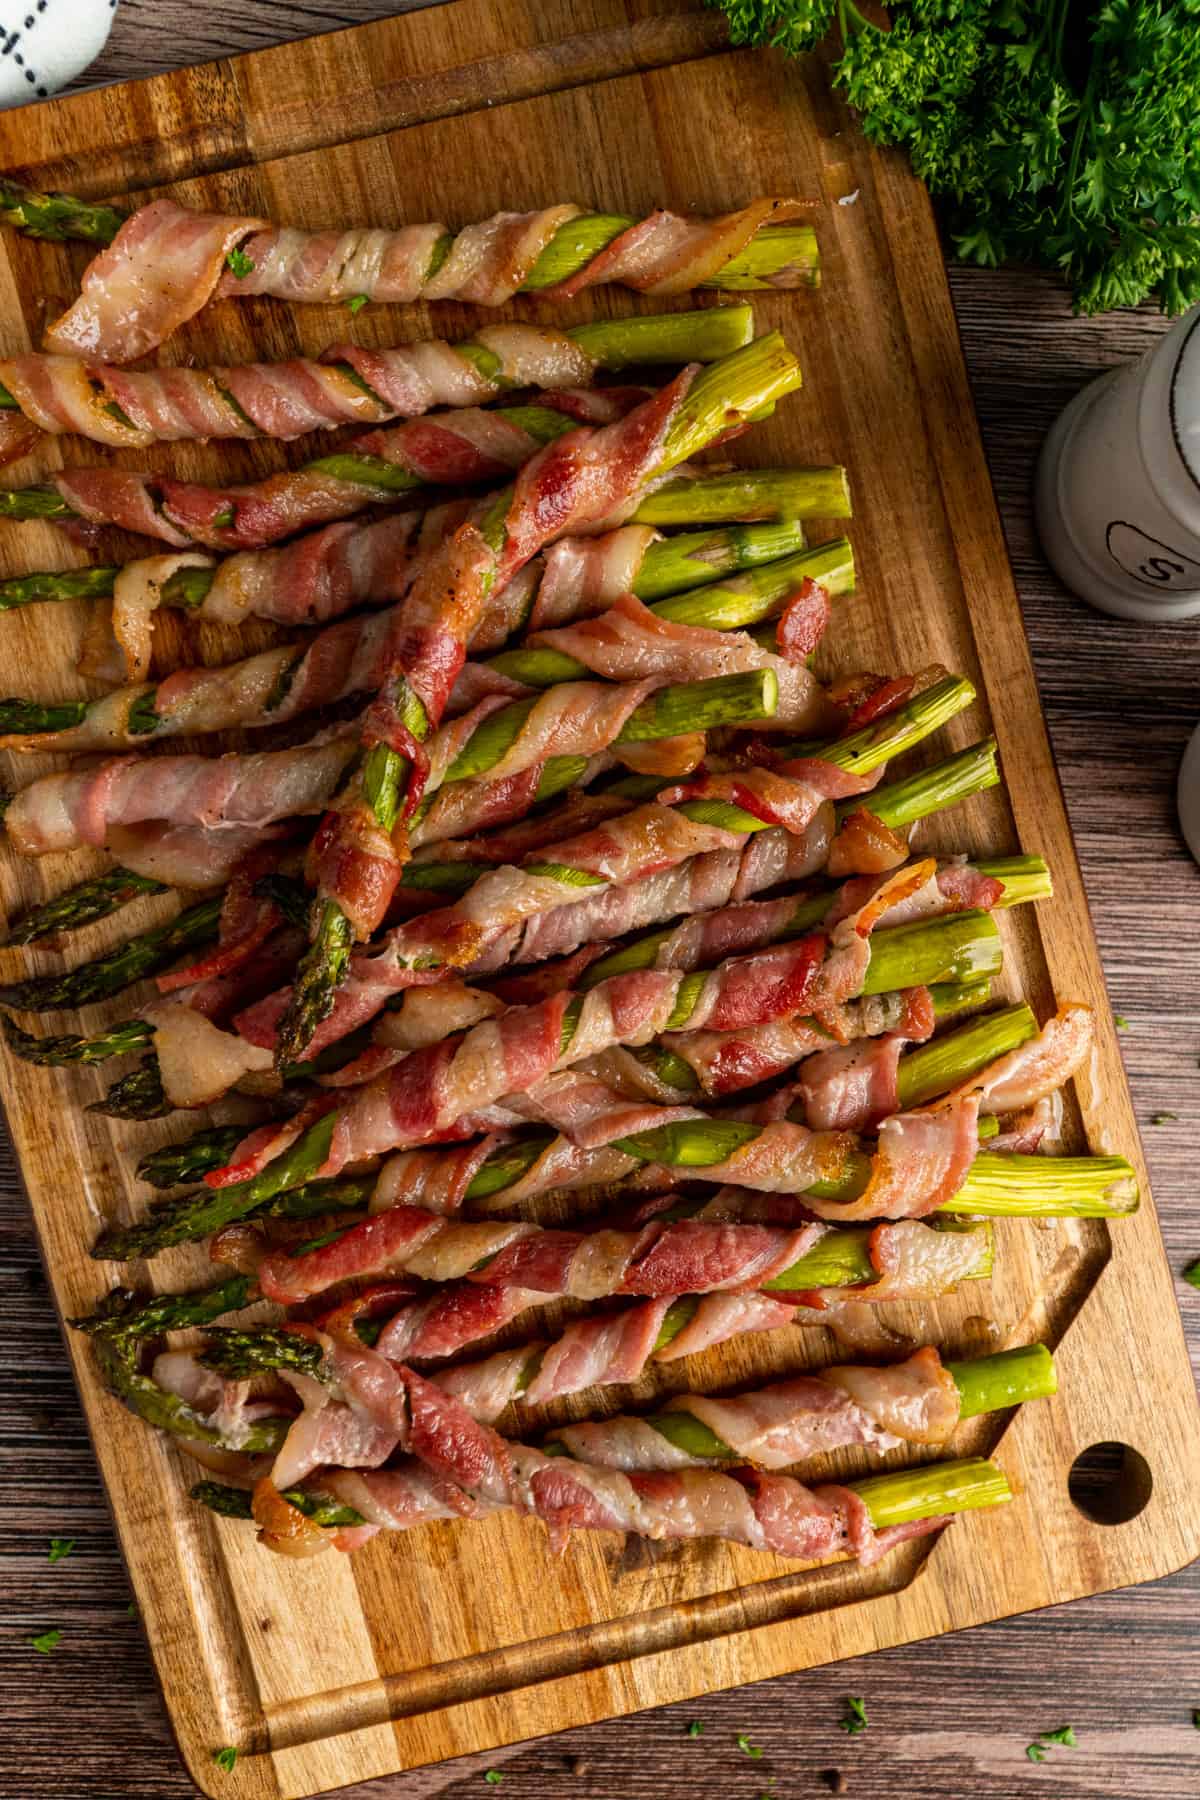 Asparagus wrapped in bacon piled up on a wood cutting board.